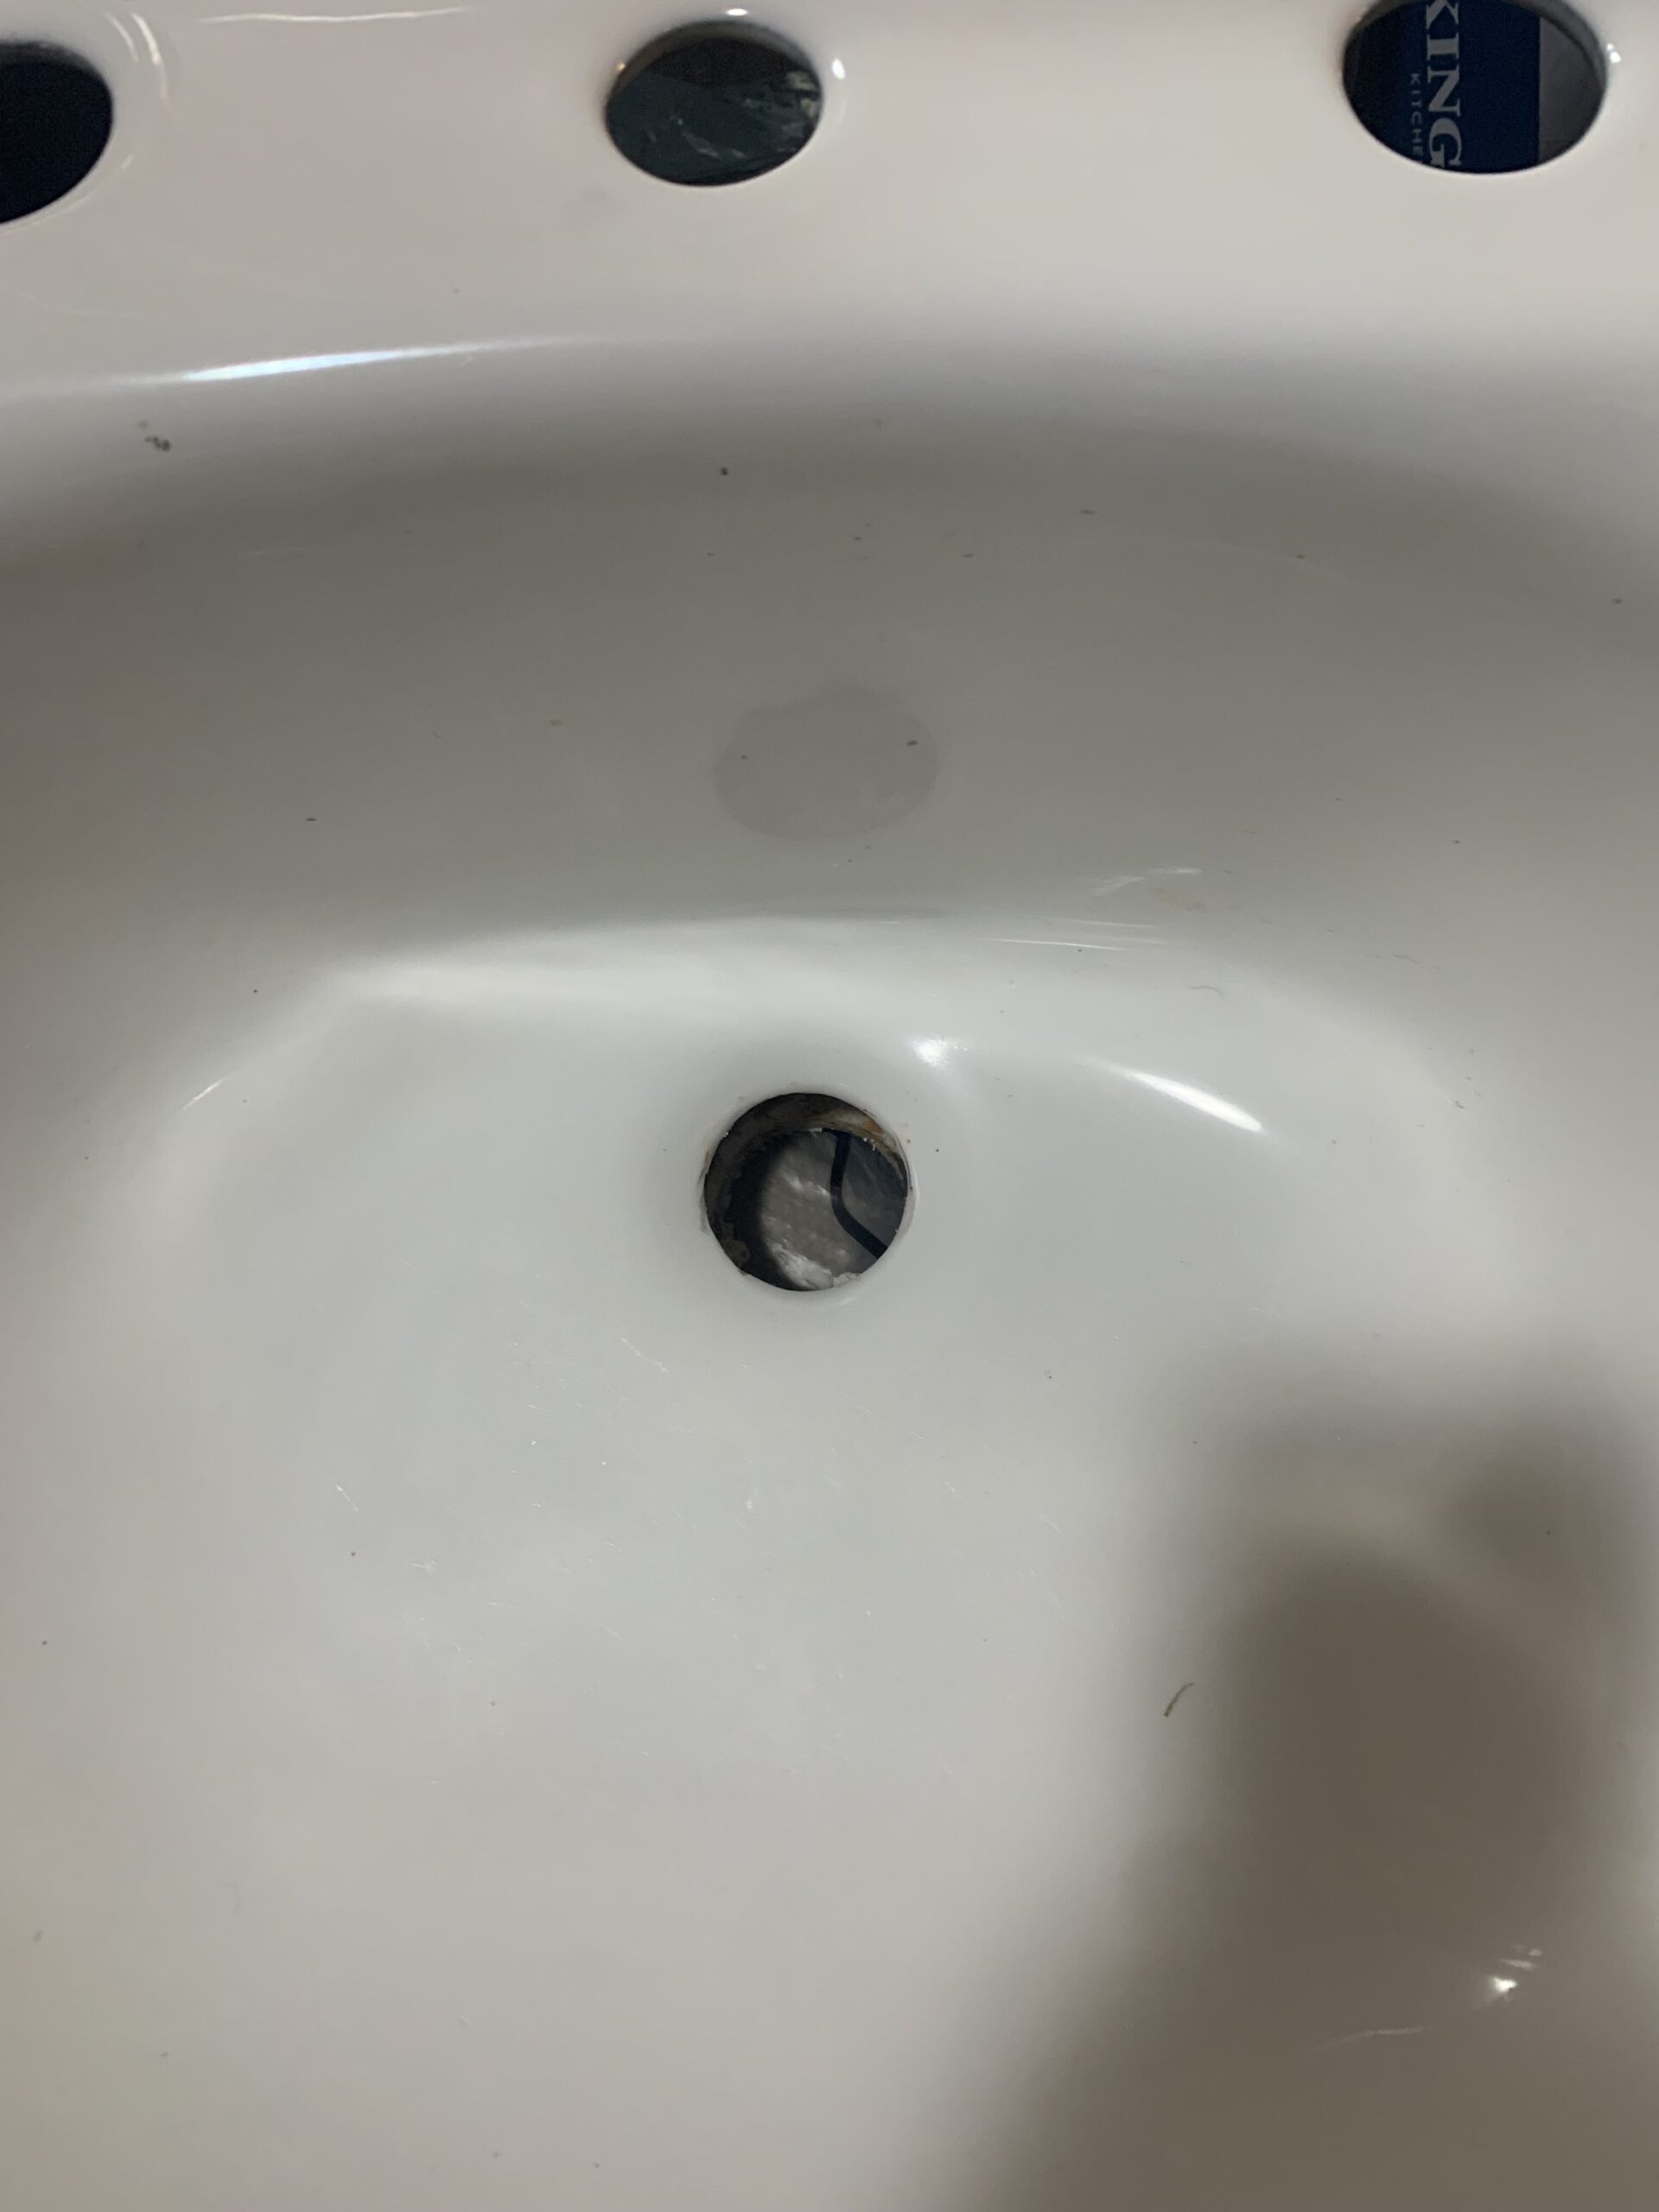 Rust stained removed from sink drain